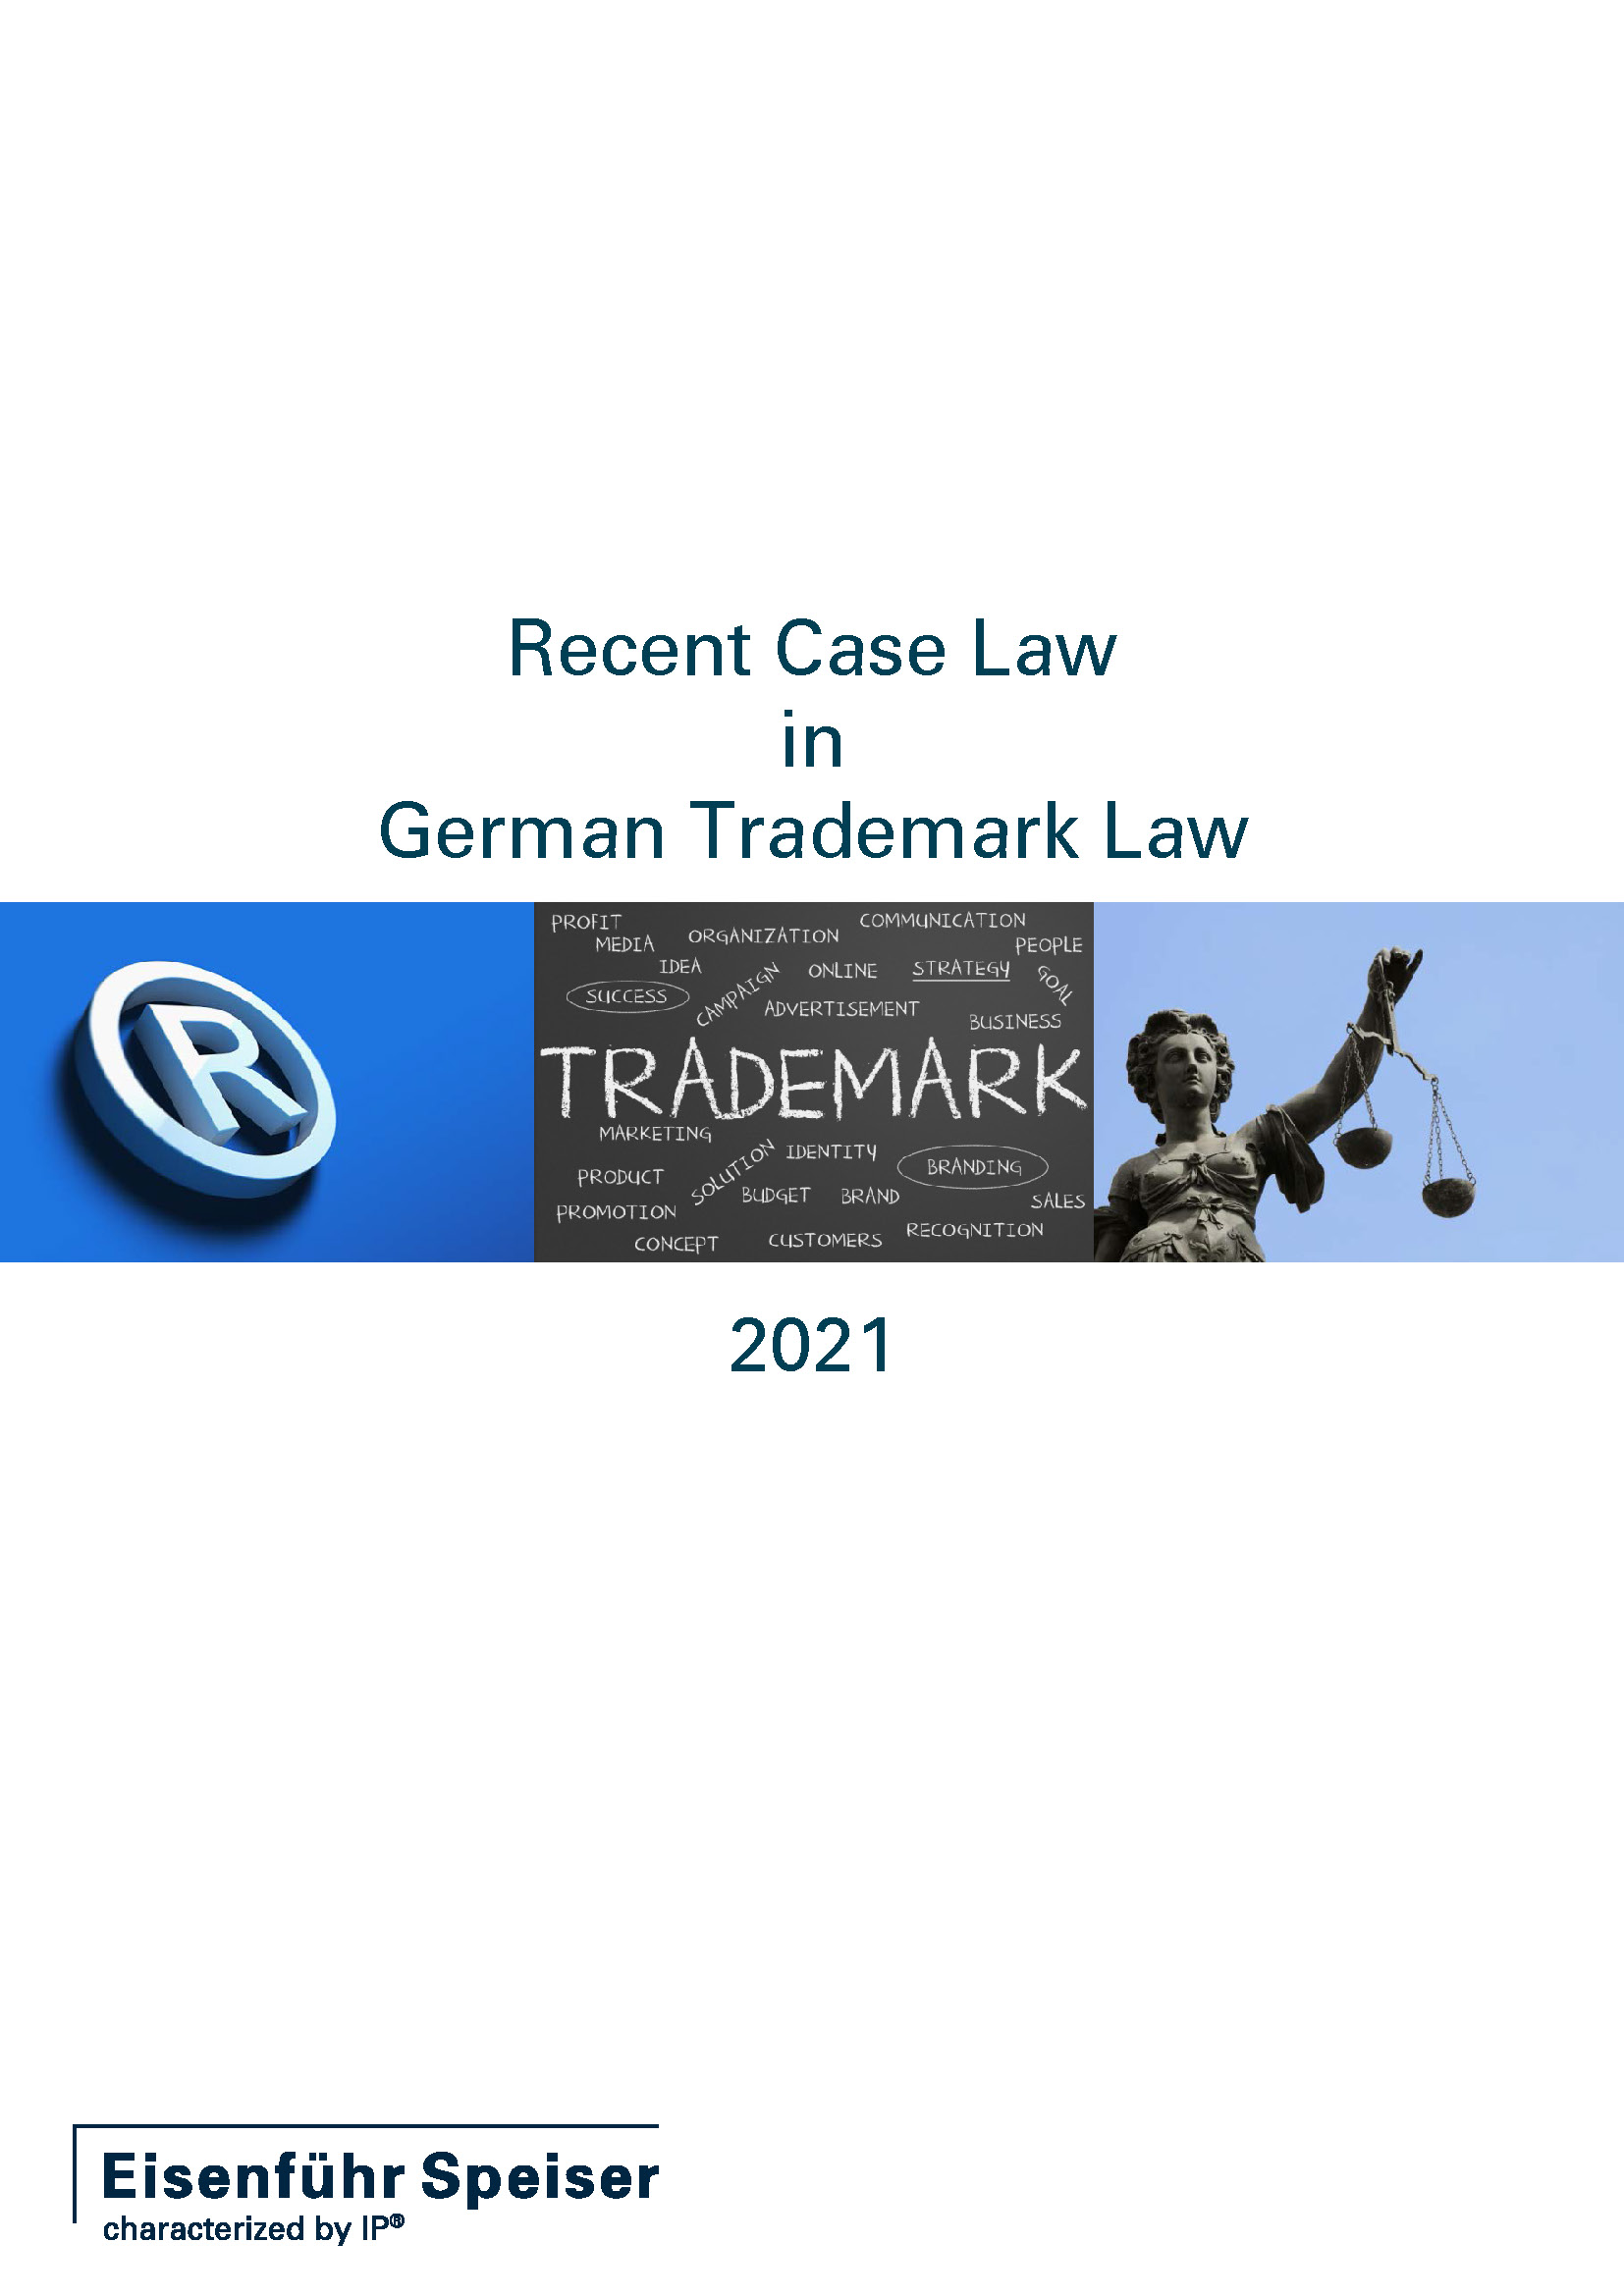 Recent Case Law in German Trademark Law